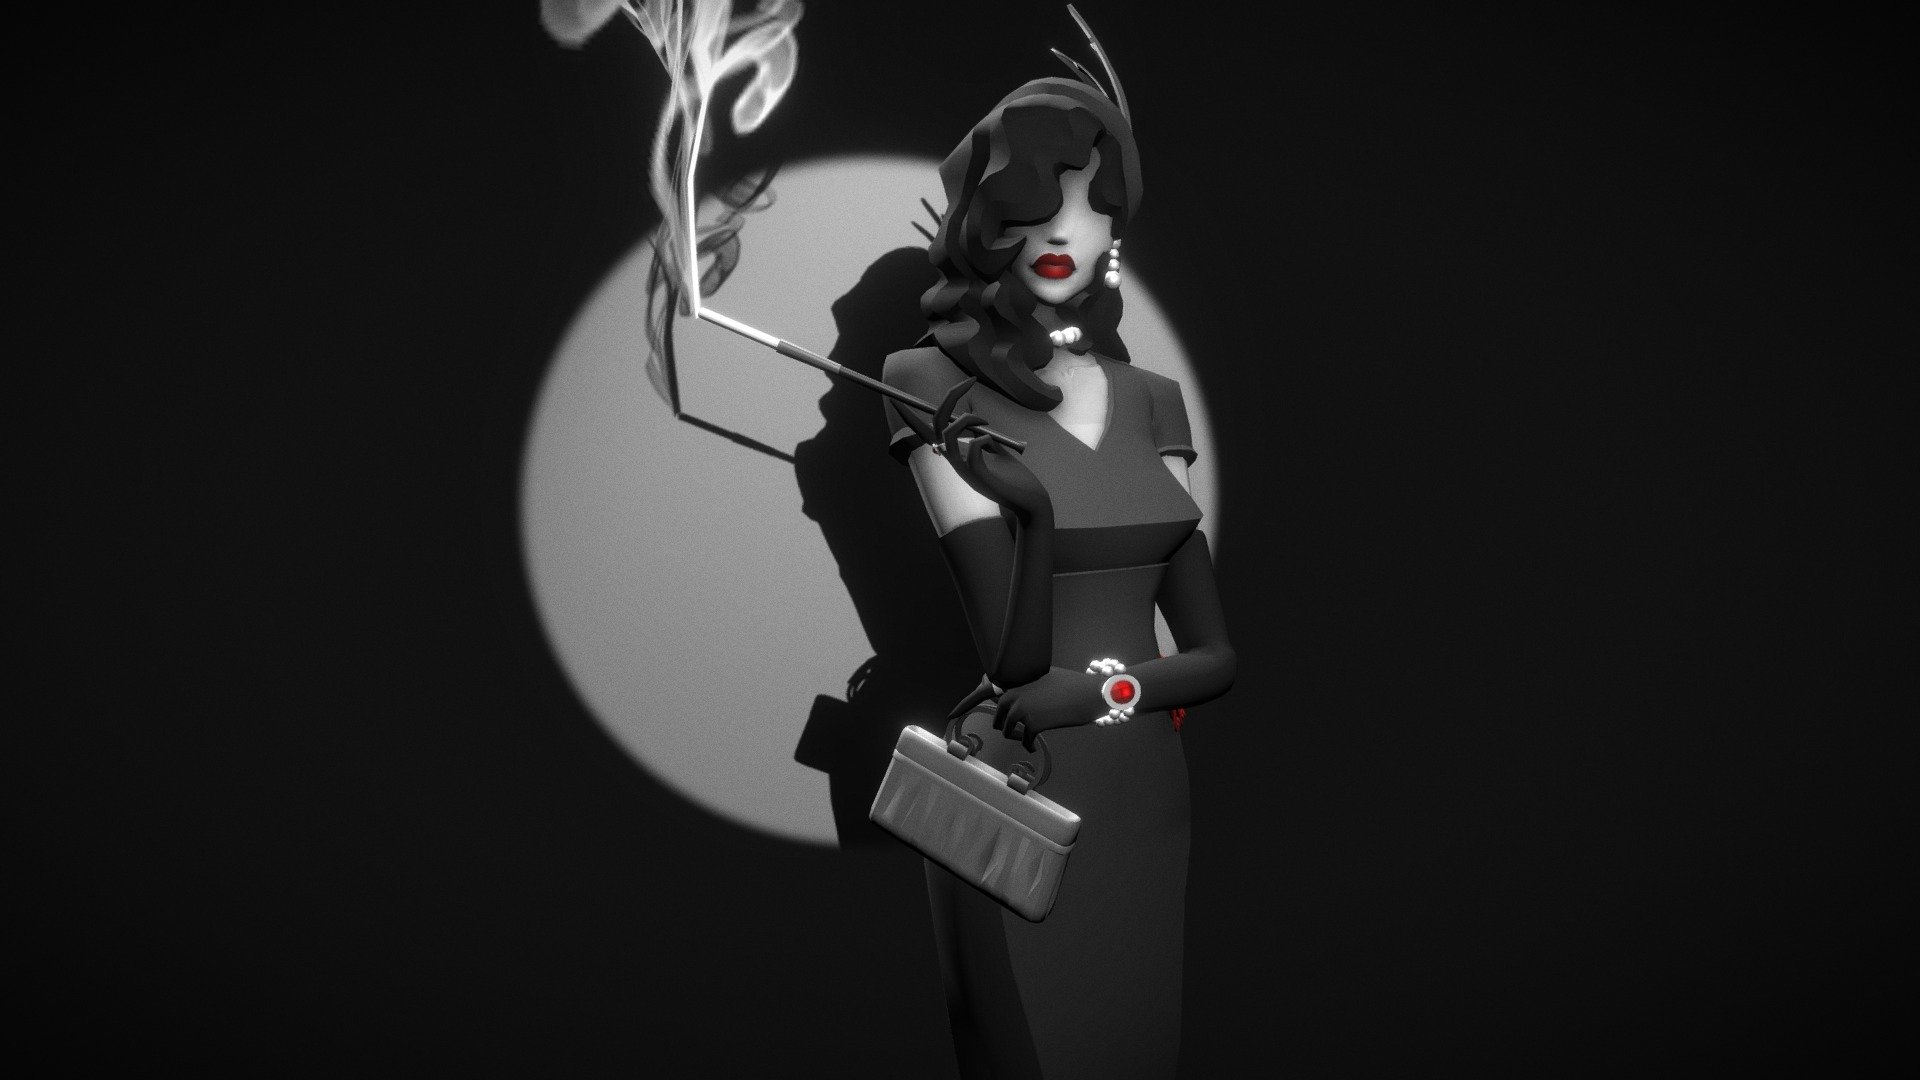 A neo-noir 1940's seductive woman designed to a brief. This project has taken me 1 1/2 weeks to complete, and has certainly been a challenge due to one of the requirements being that the character should look modeled rather than sculpted. This character was a lot of fun as it was an art style I'd never done before, and I'm pleased with the outcome! 

I created a high poly sculpt to use as a base for the hair, body and dress, and then retoplogized it and modeled everything else  in 3Ds Max.

More on Artstation: https://www.artstation.com/artwork/rmLy6

Below is my original concept sketch for the character:
 - Femme Fatale - 3D model by Shannon Symonds (@ShannonSymonds) 3d model